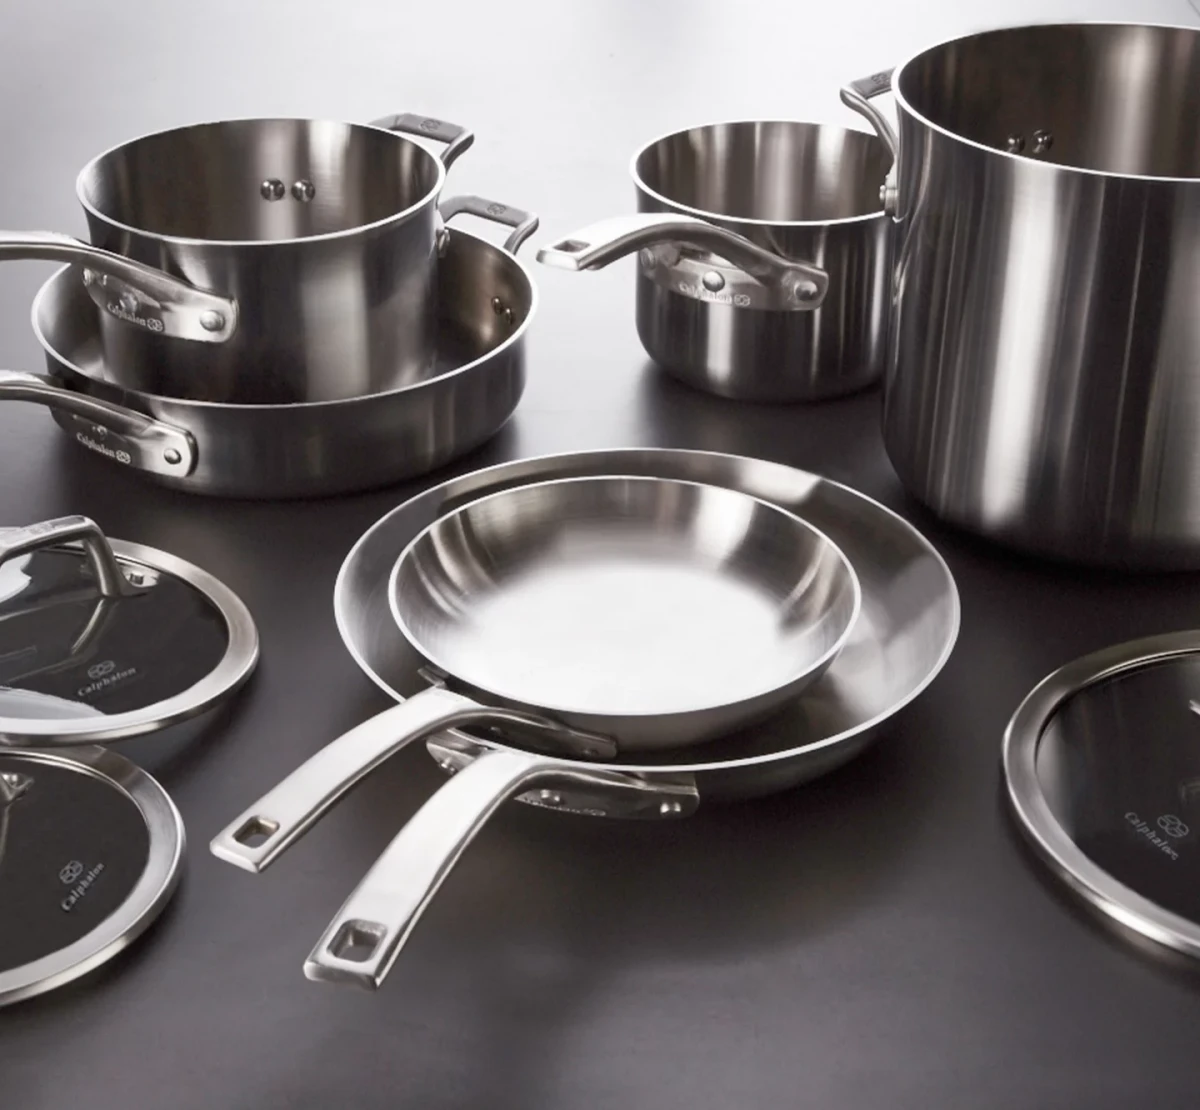 pans and pots from stainless steel